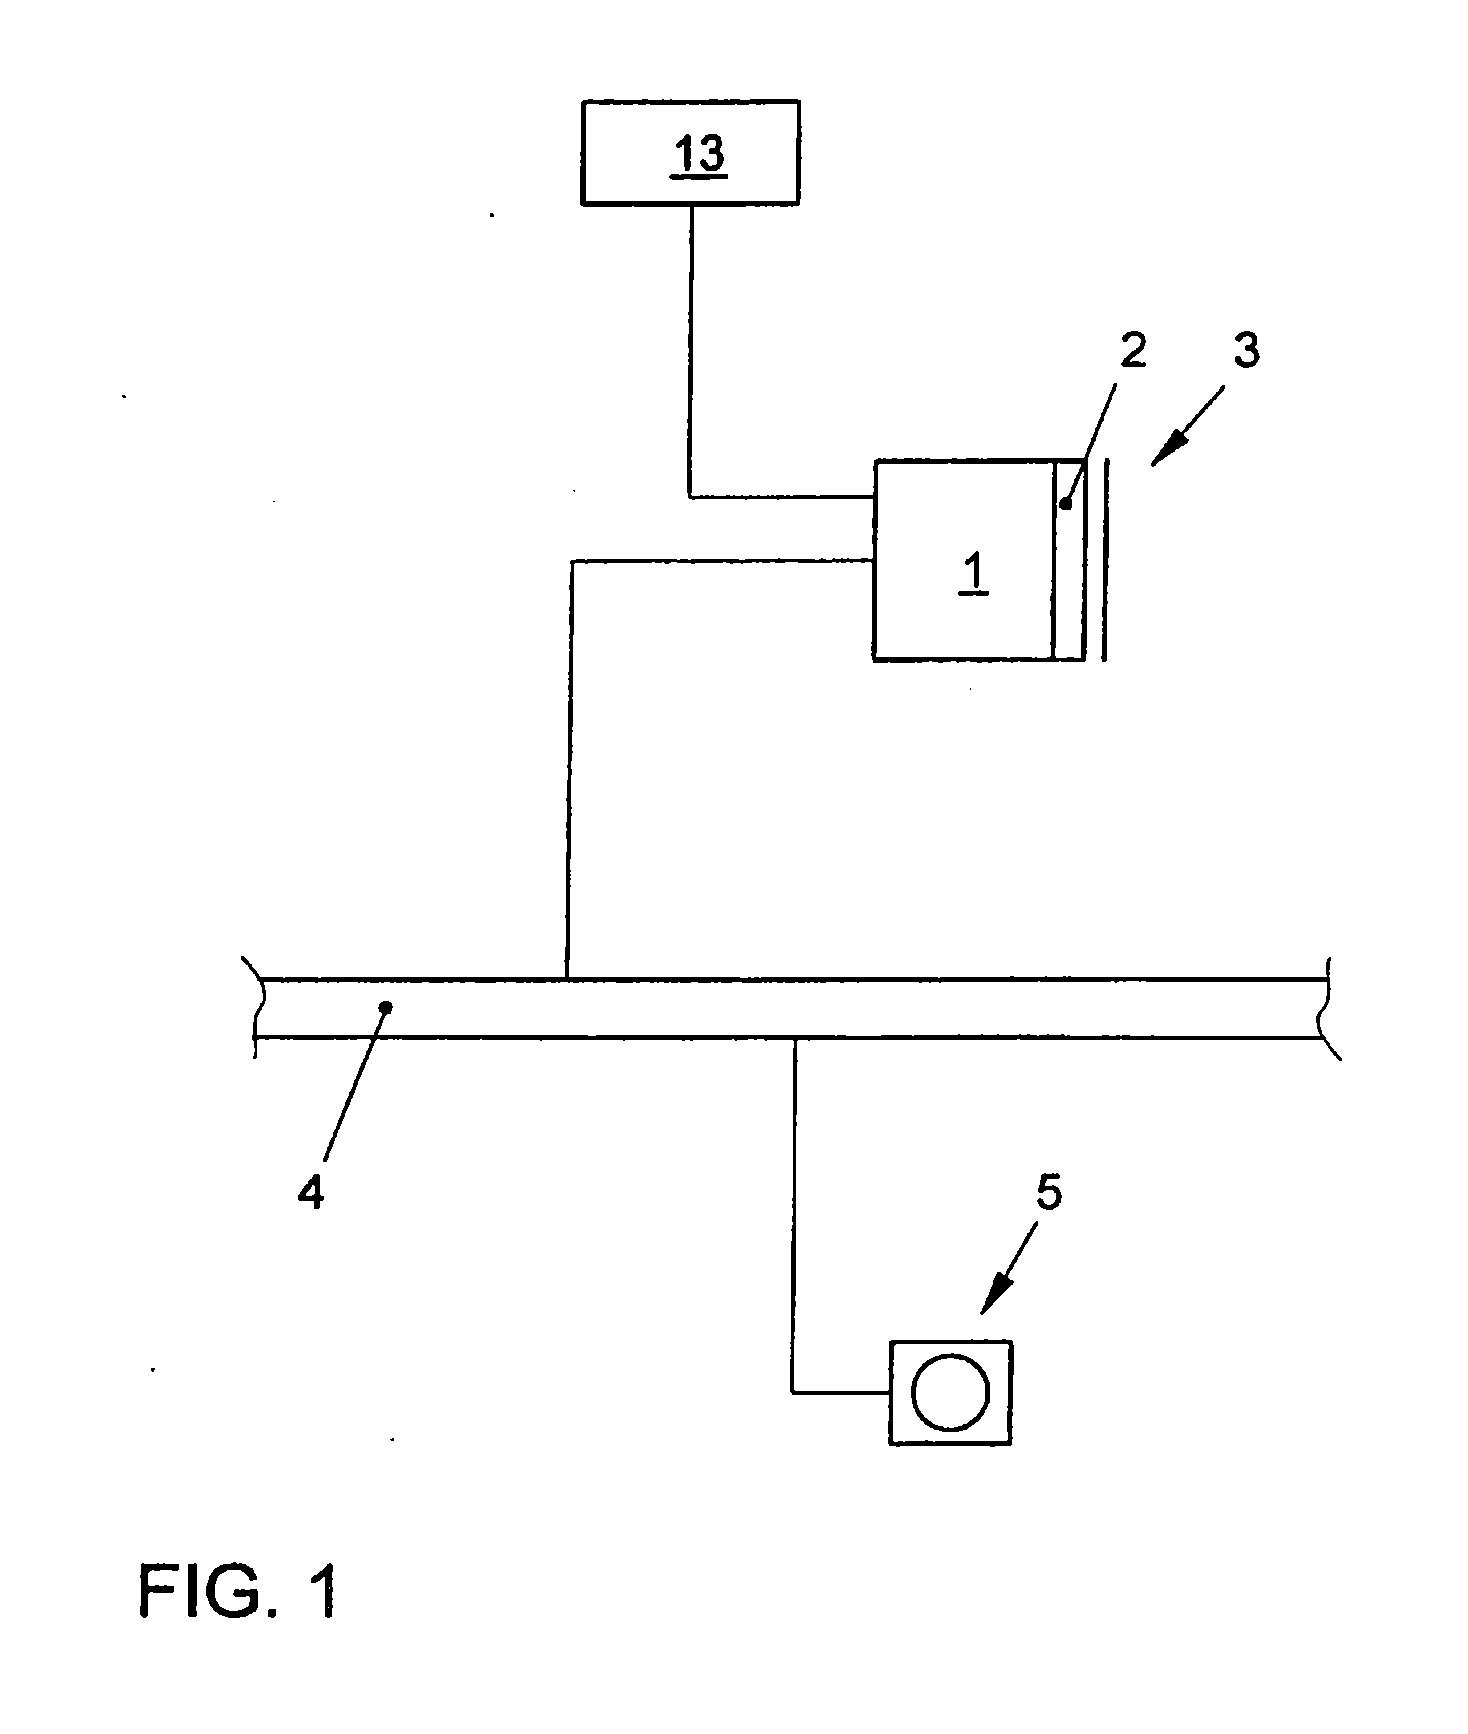 Method for Representing Items of Information in a Means of Transportation and Instrument Cluster for a Motor Vehicle